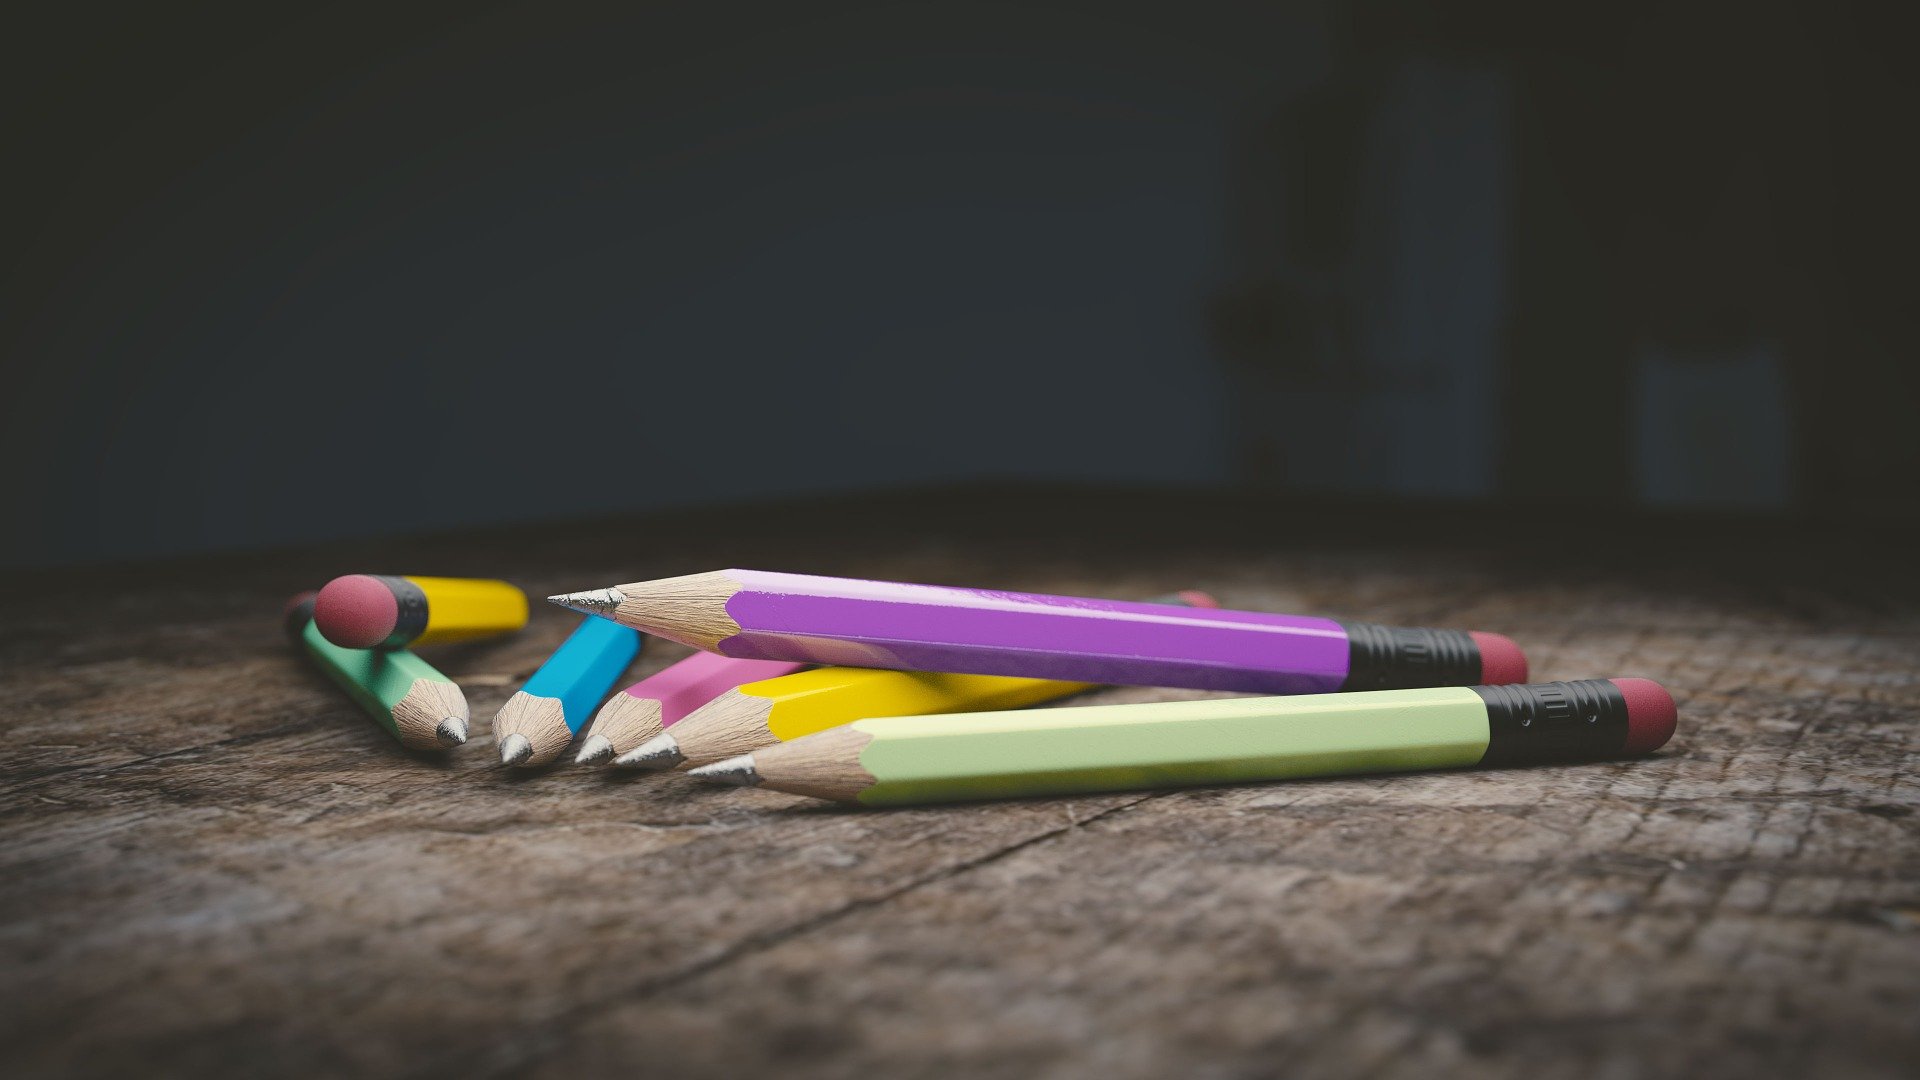 Seven brightly colored pencils lying on a desk.